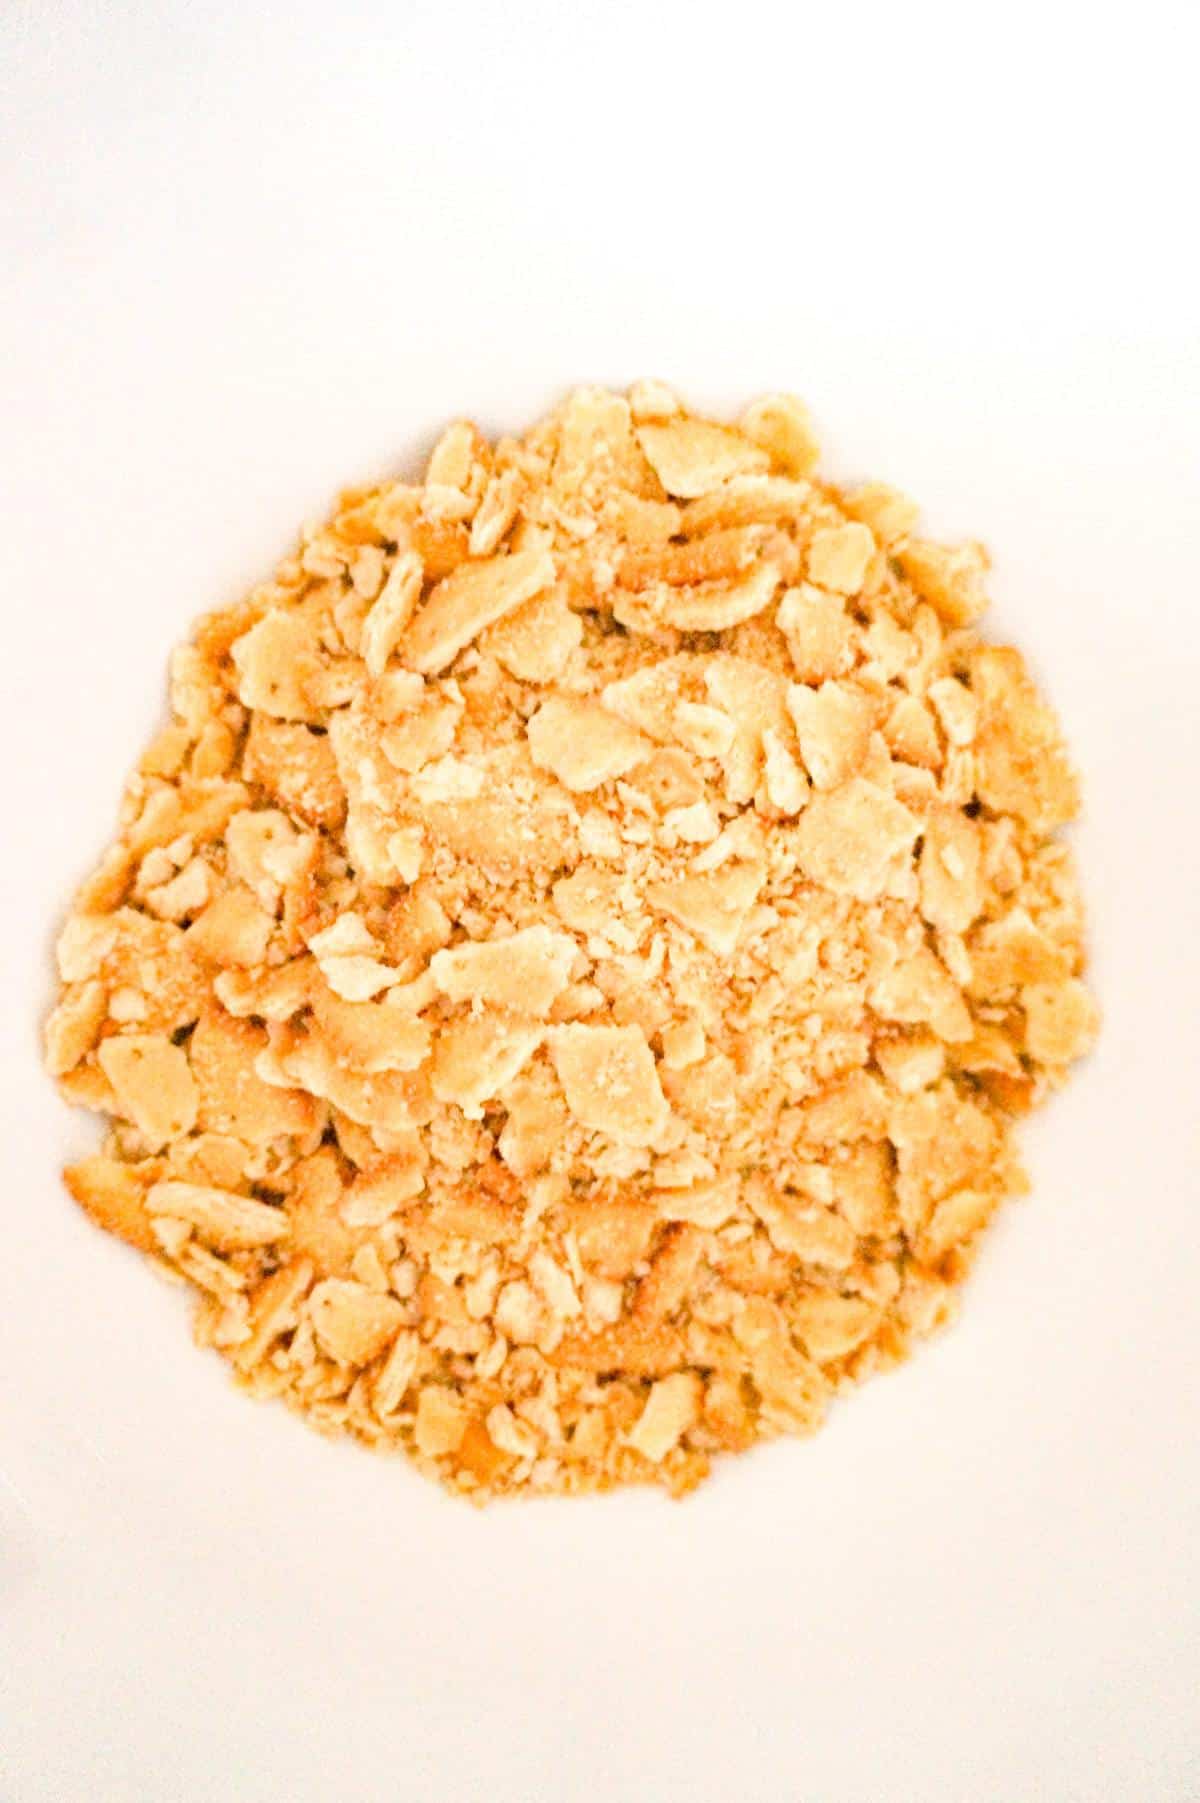 crumbled Ritz crackers in a mixing bowl